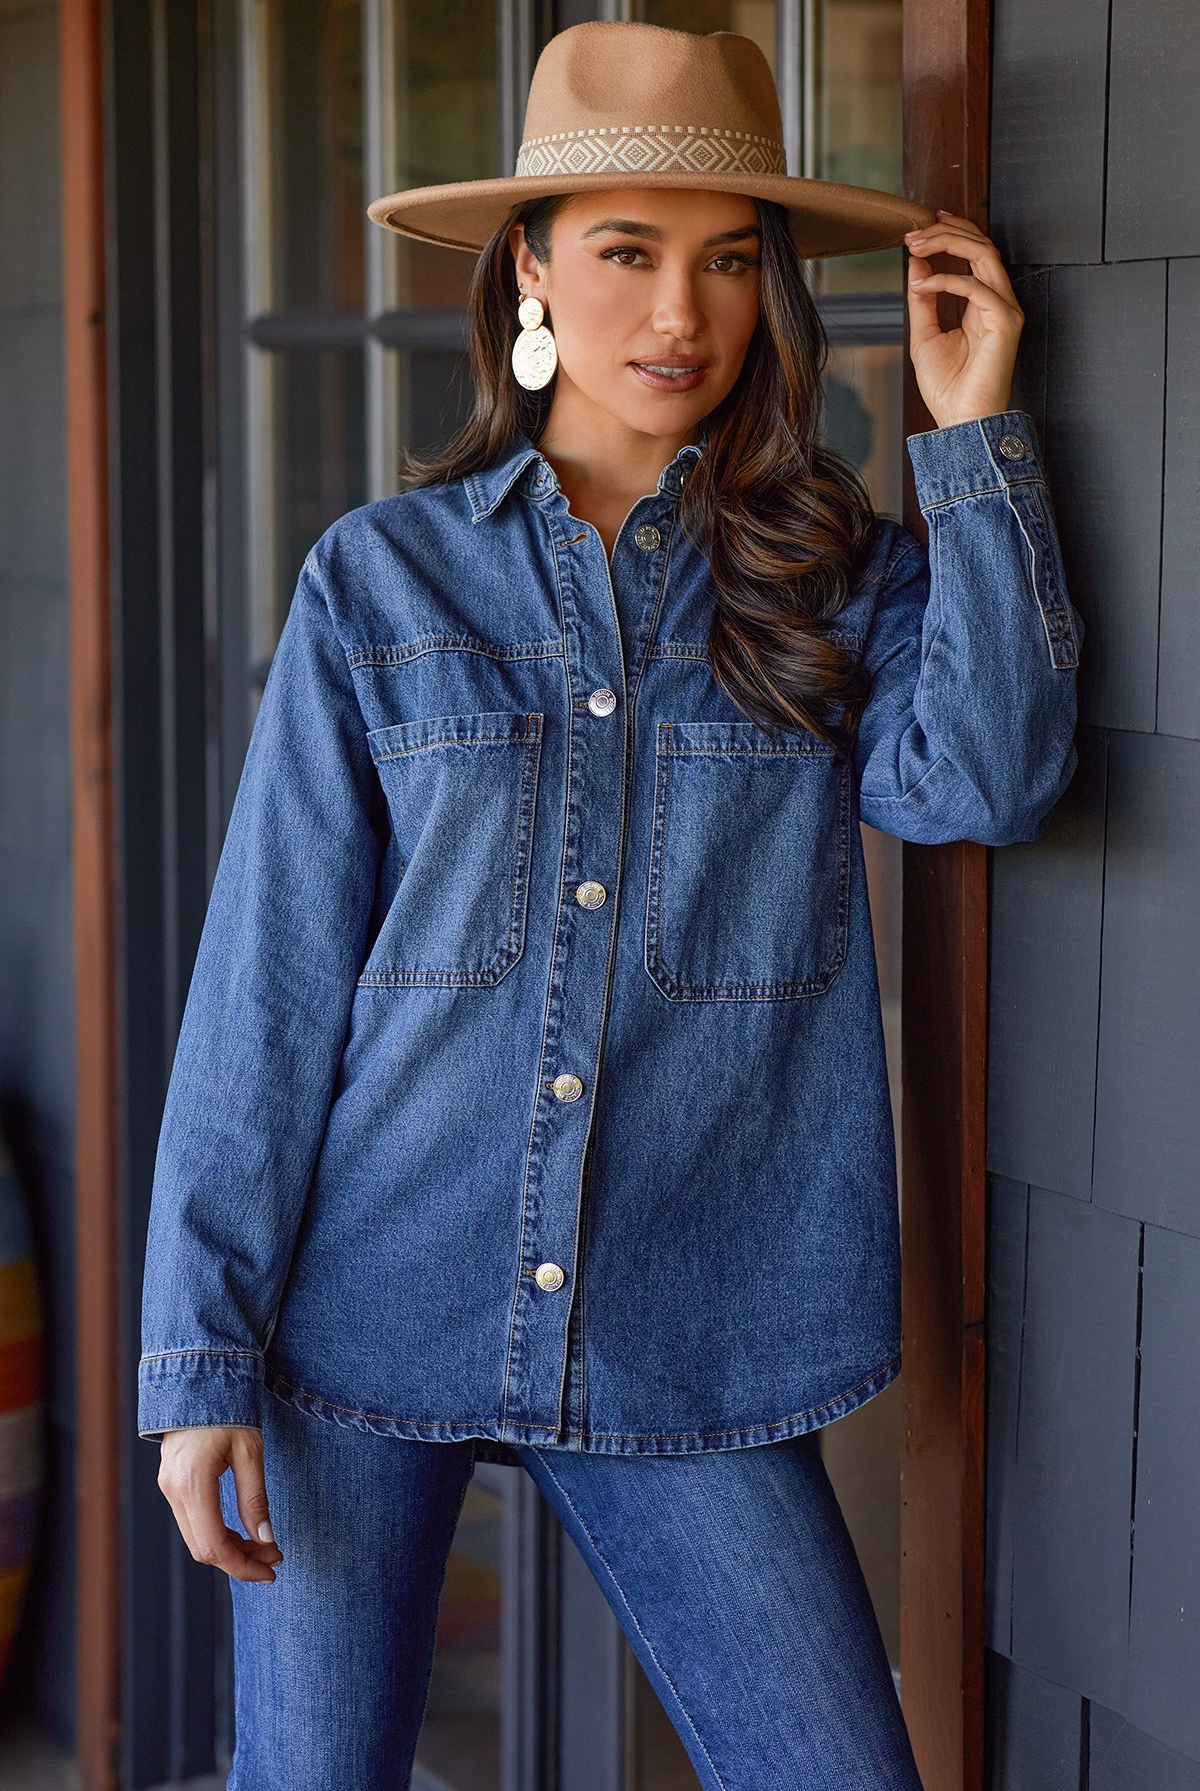 Medium Wash Denim Jacket with Front Patch Pockets / Stuffology Boutique-Jackets-Royalty for Me-Stuffology - Where Vintage Meets Modern, A Boutique for Real Women in Crosbyton, TX